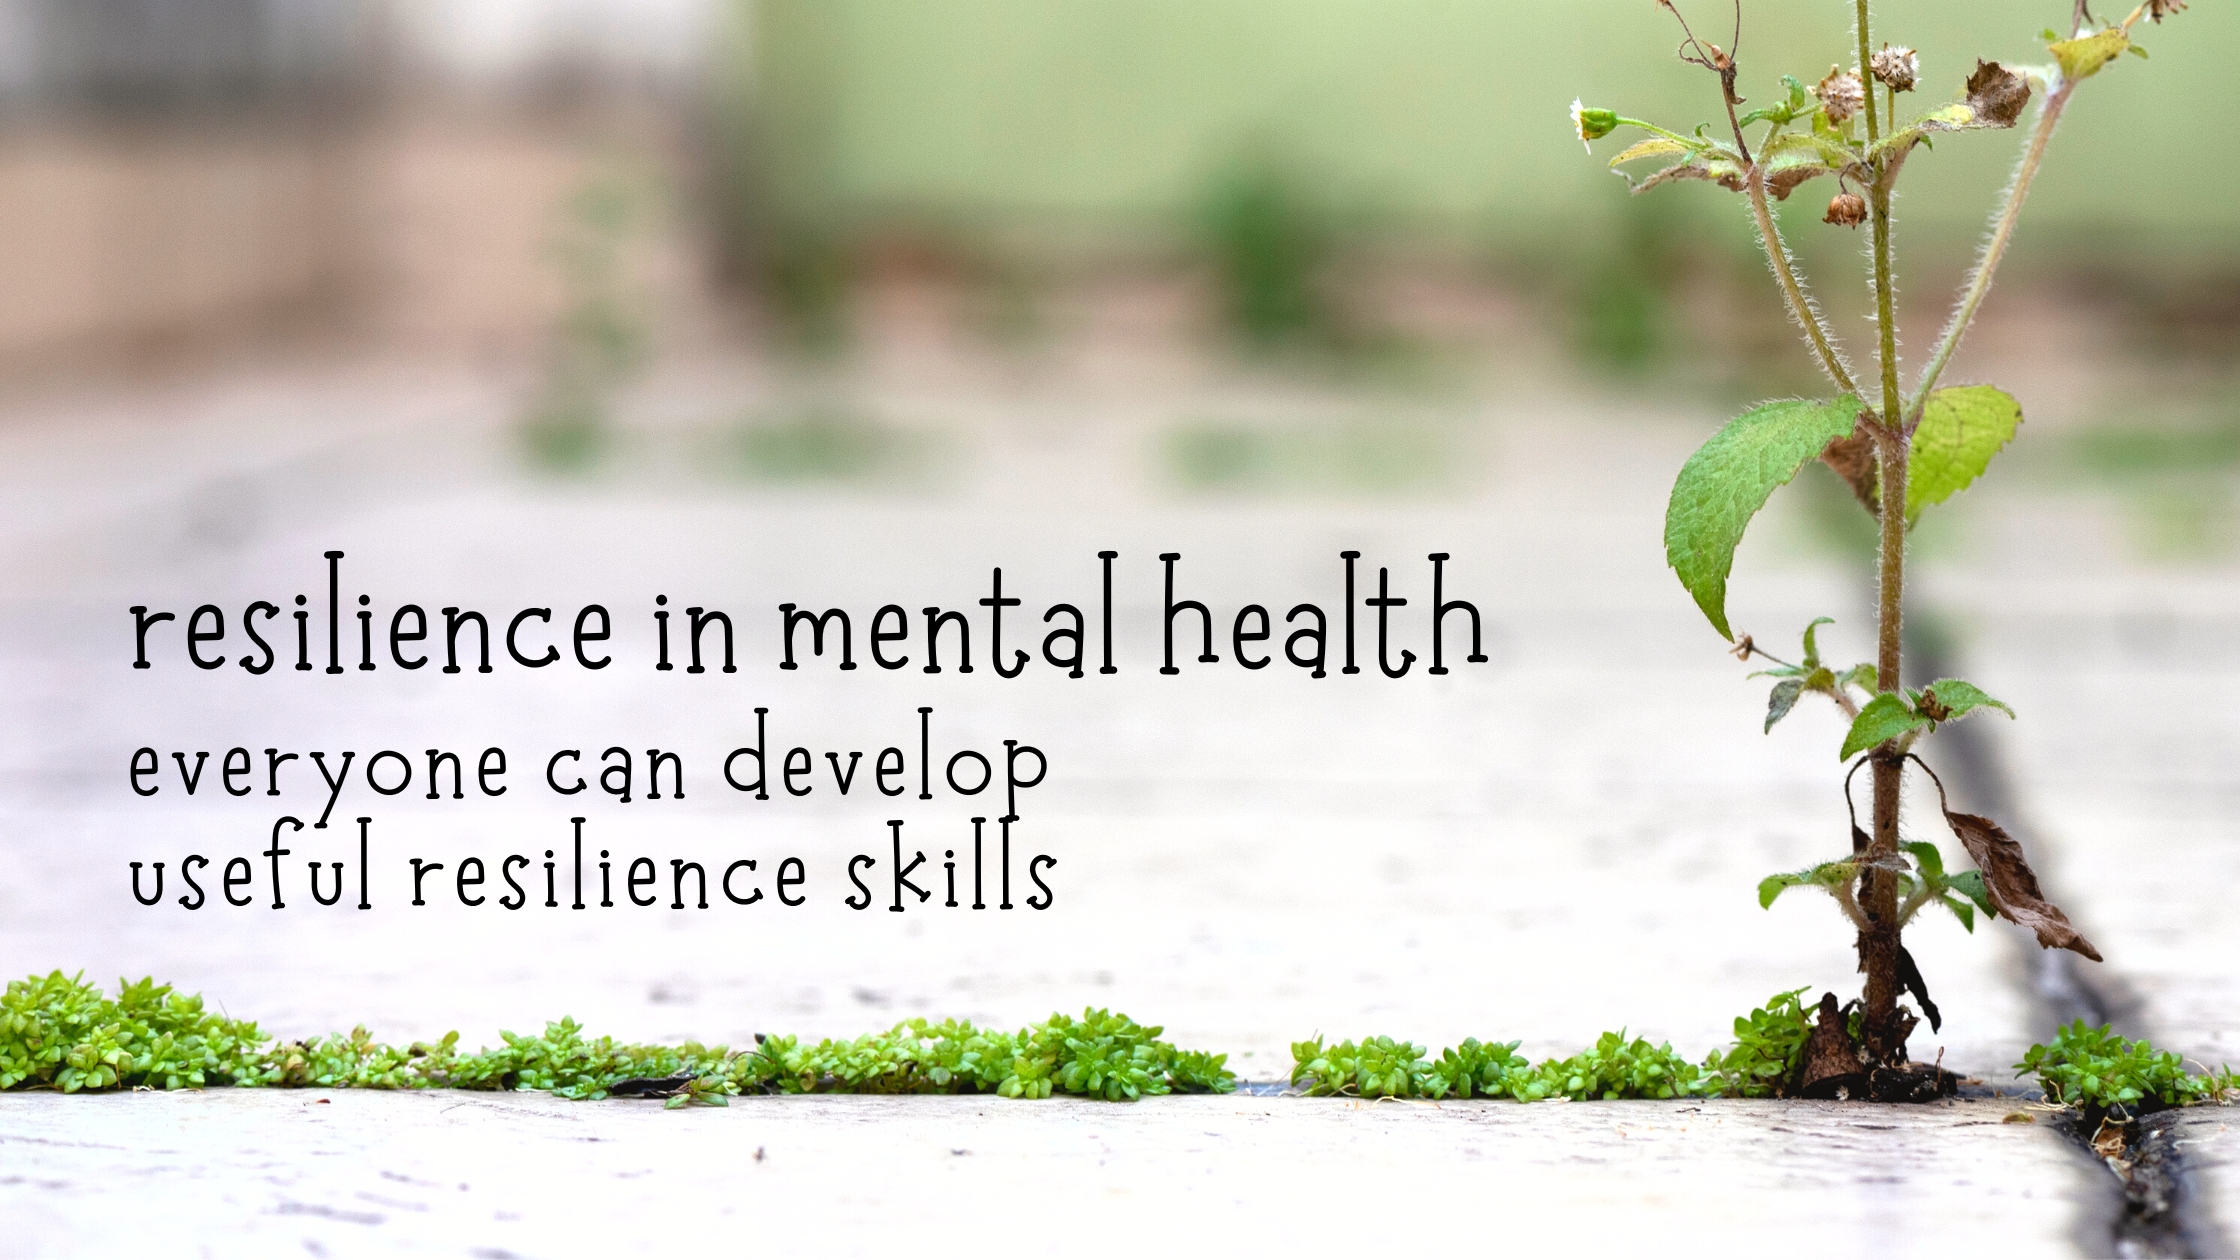 Resilience in mental health, Resilience, mental health, how to be Resilient, become resilient, how to become resilient,